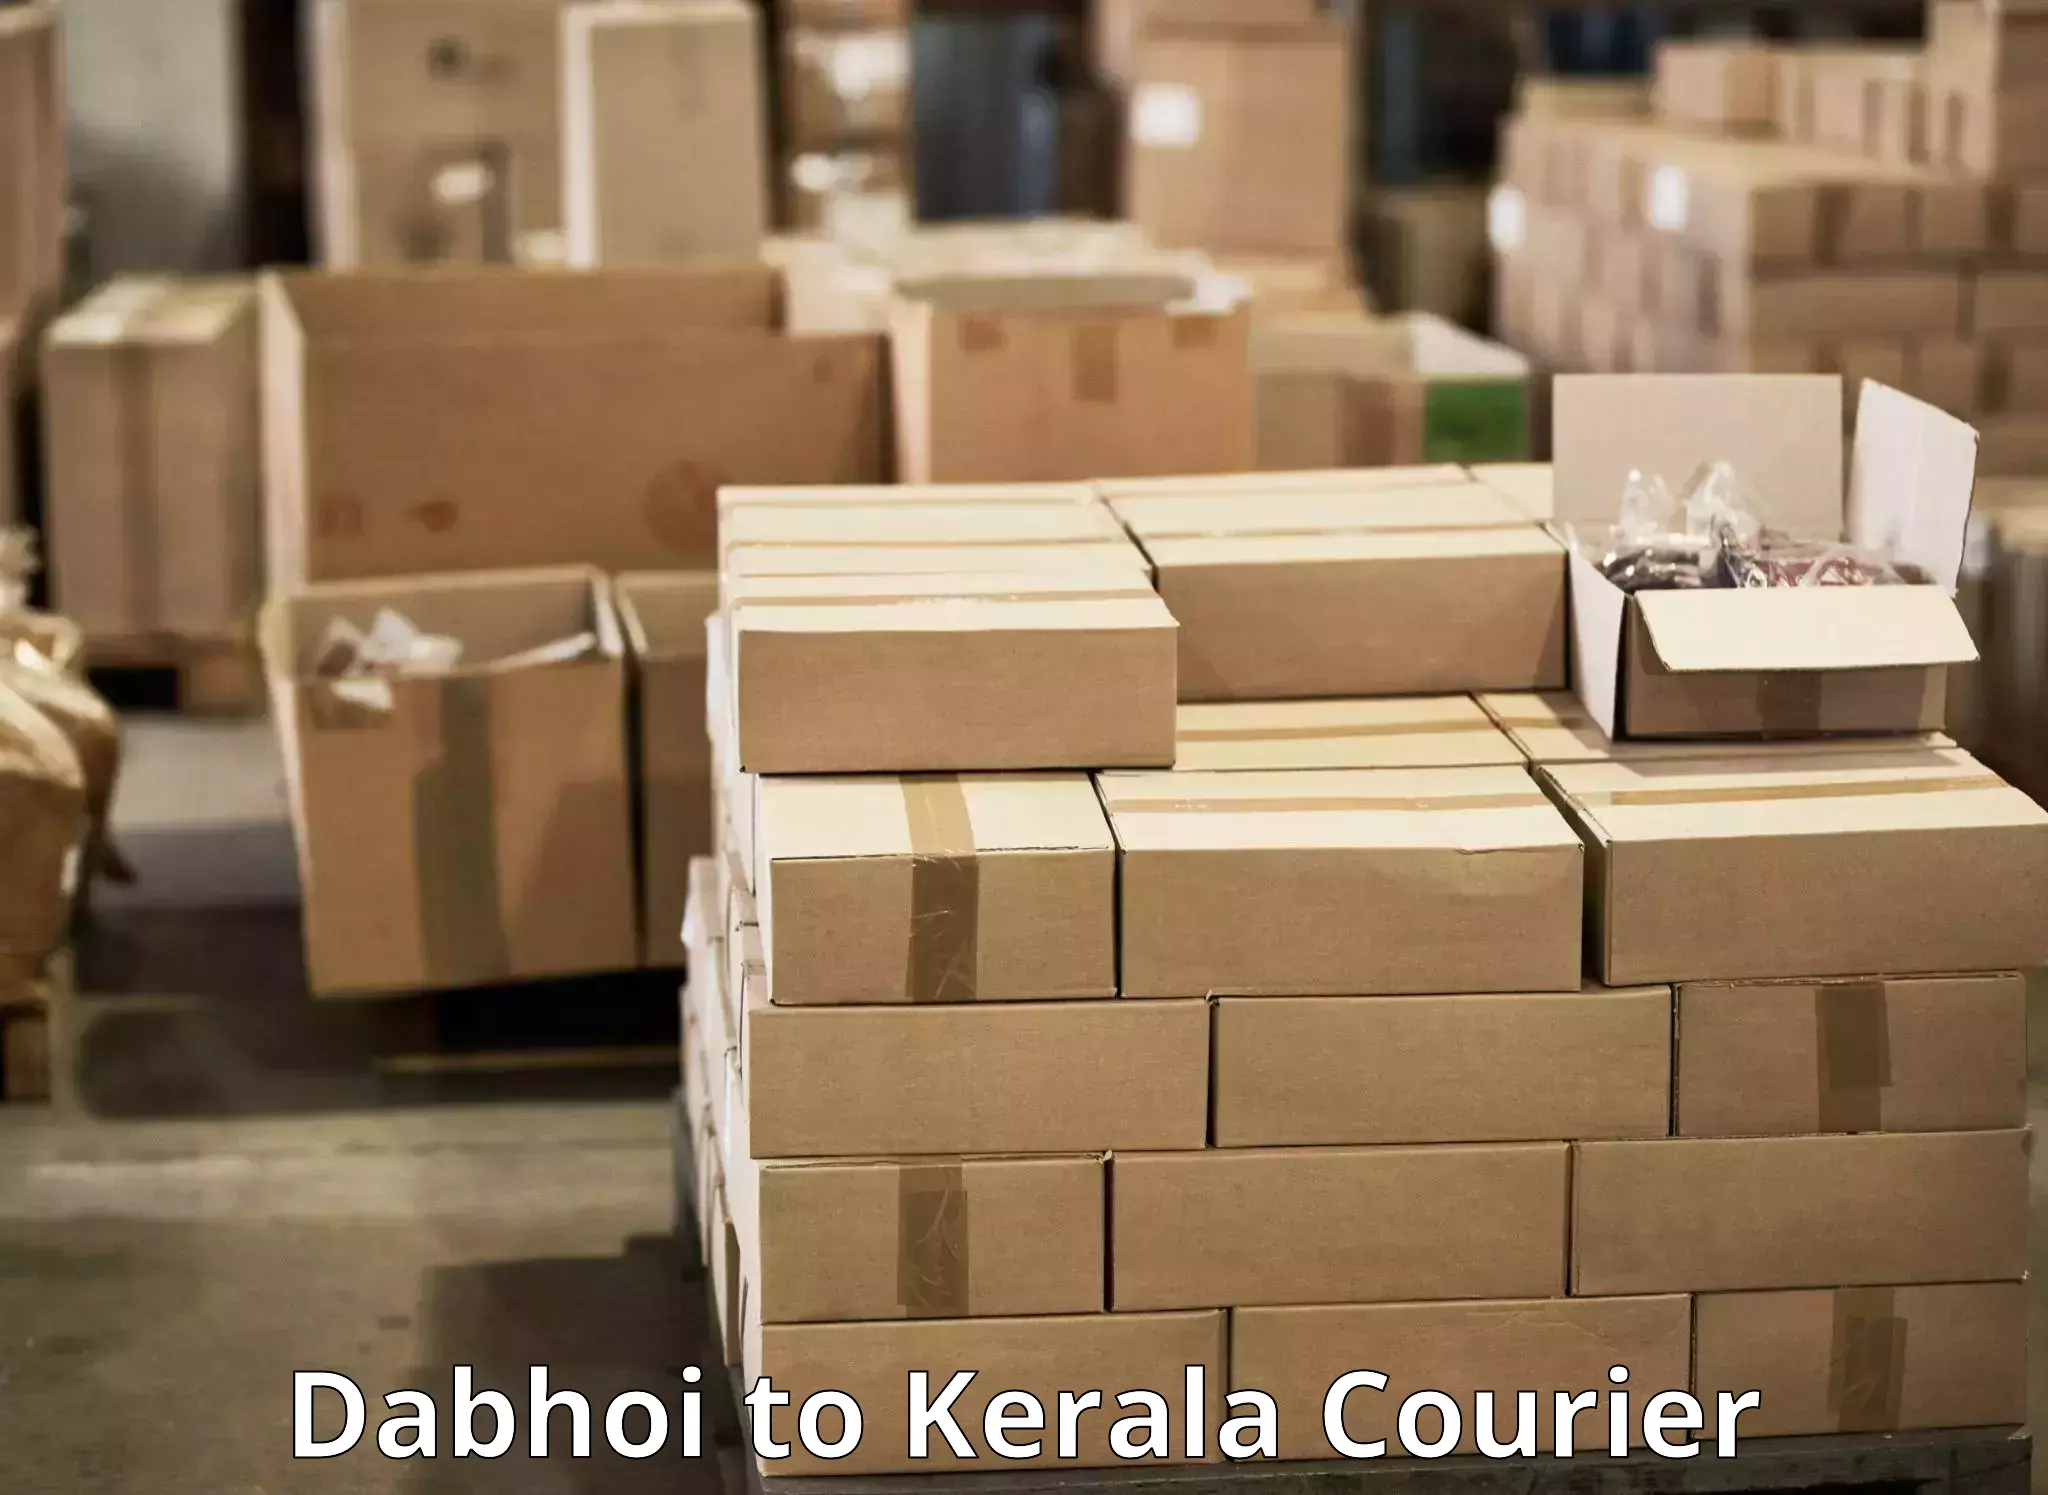 End-to-end delivery in Dabhoi to Poojapura